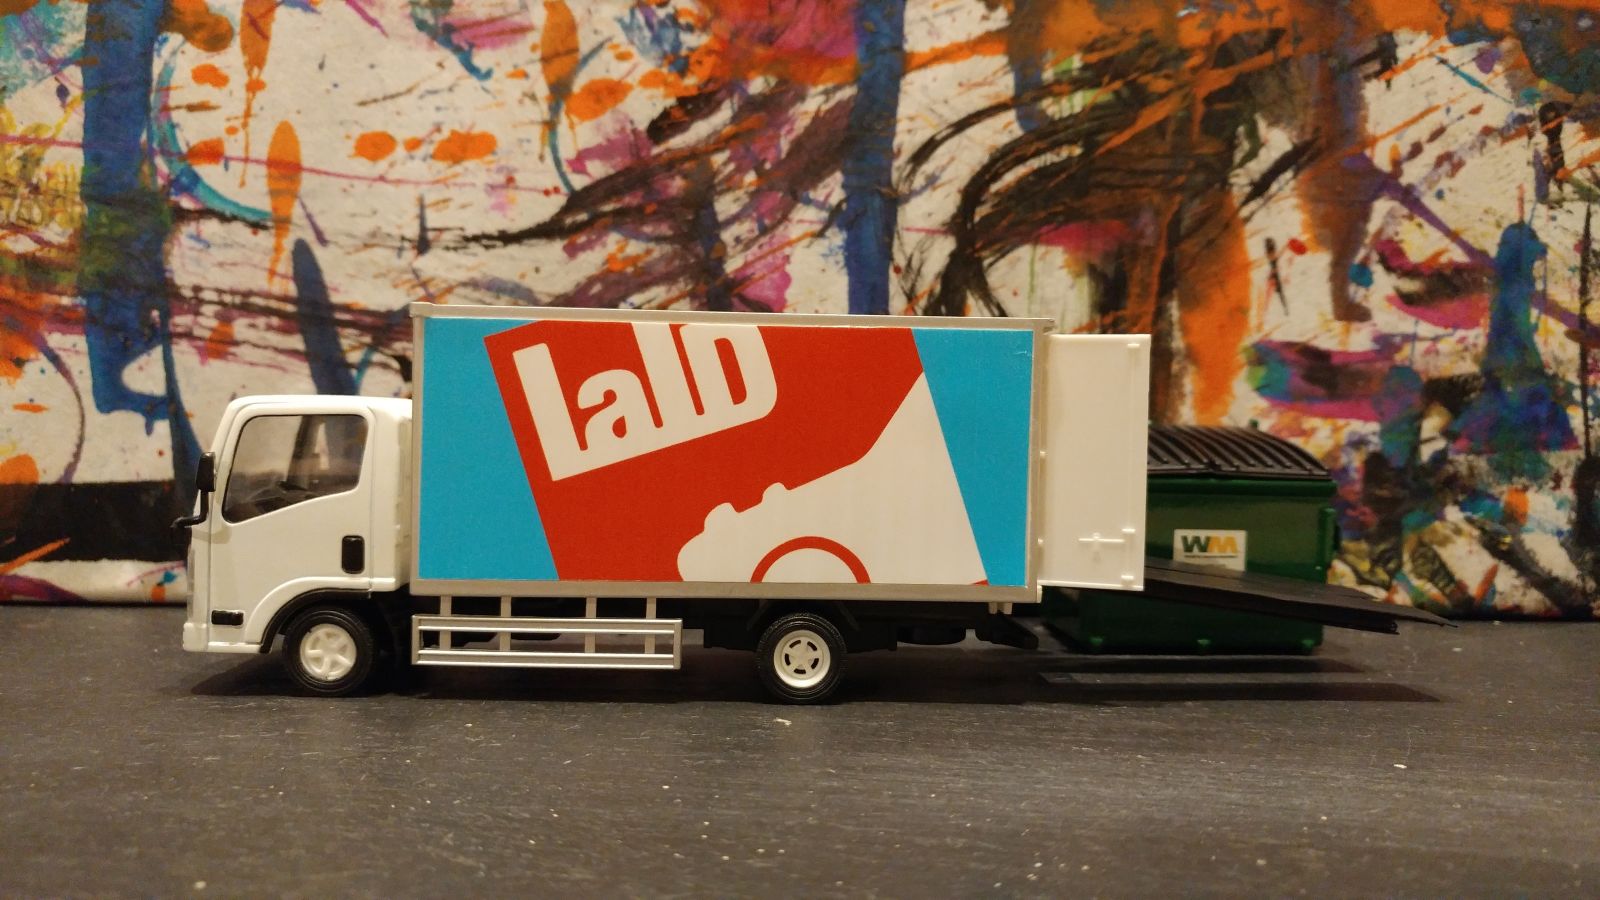 Illustration for article titled LaLD Car Week - Free For All Friday: Tyo Toys Box Truck